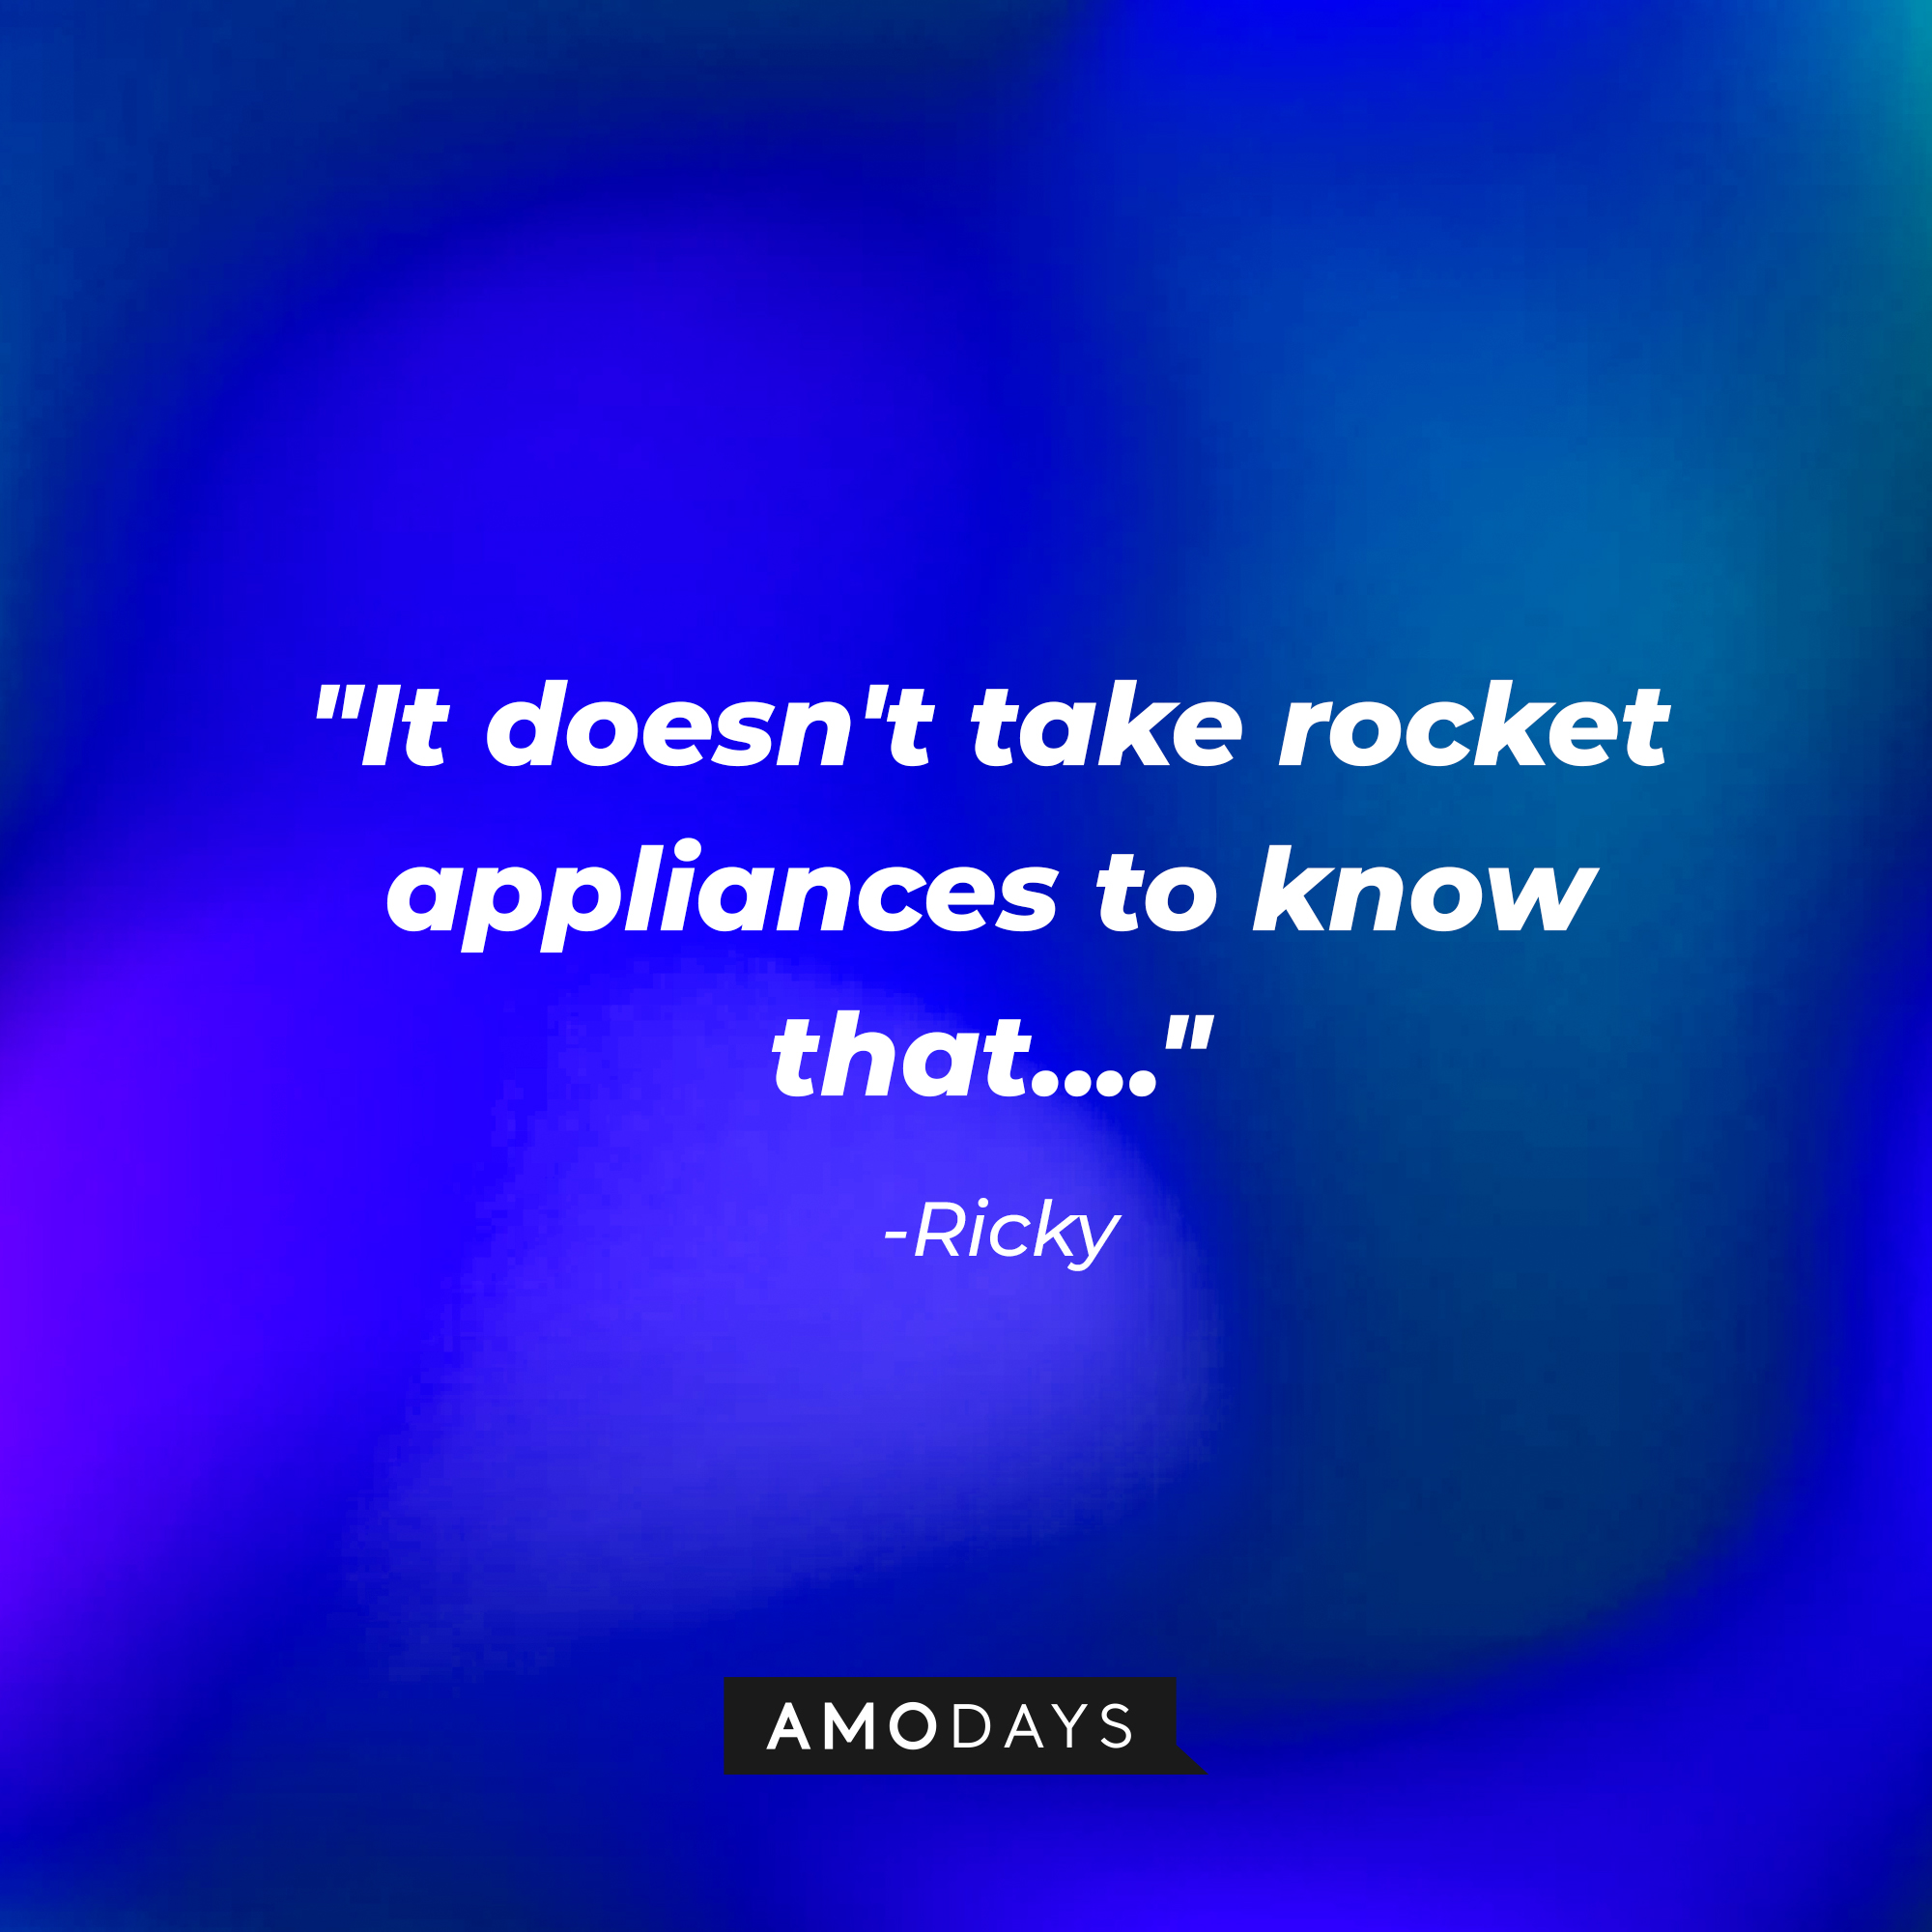 Ricky's quote, "It doesn't take rocket appliances to know that...." | Source: AmoDays